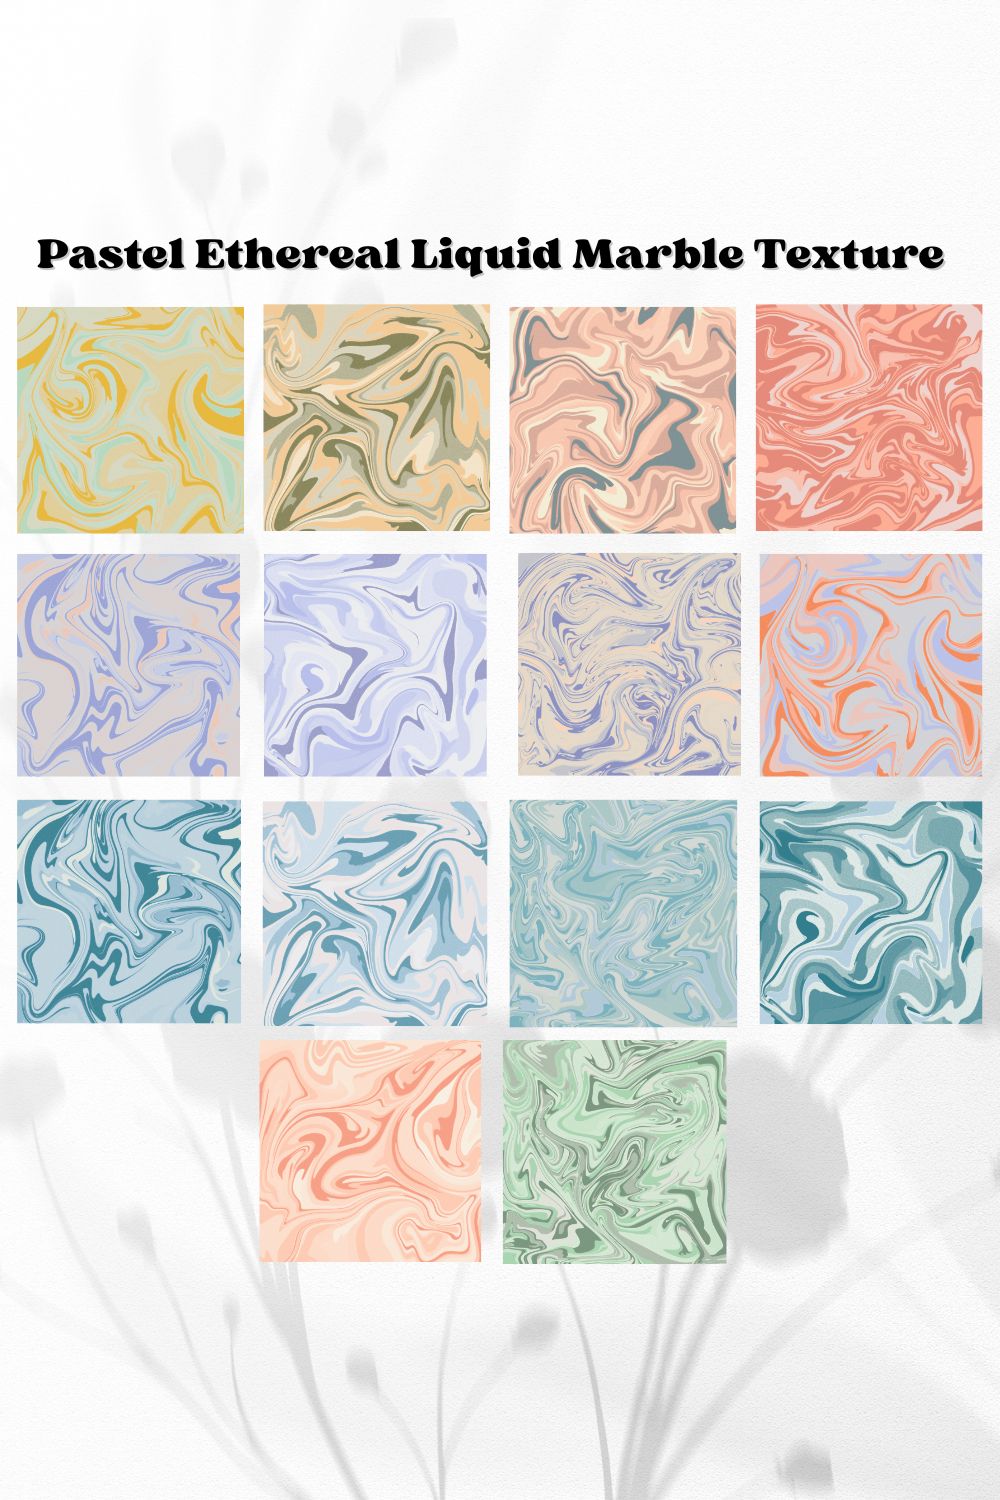 14 Pastel Ethereal Liquid Marble Texture pinterest preview image.